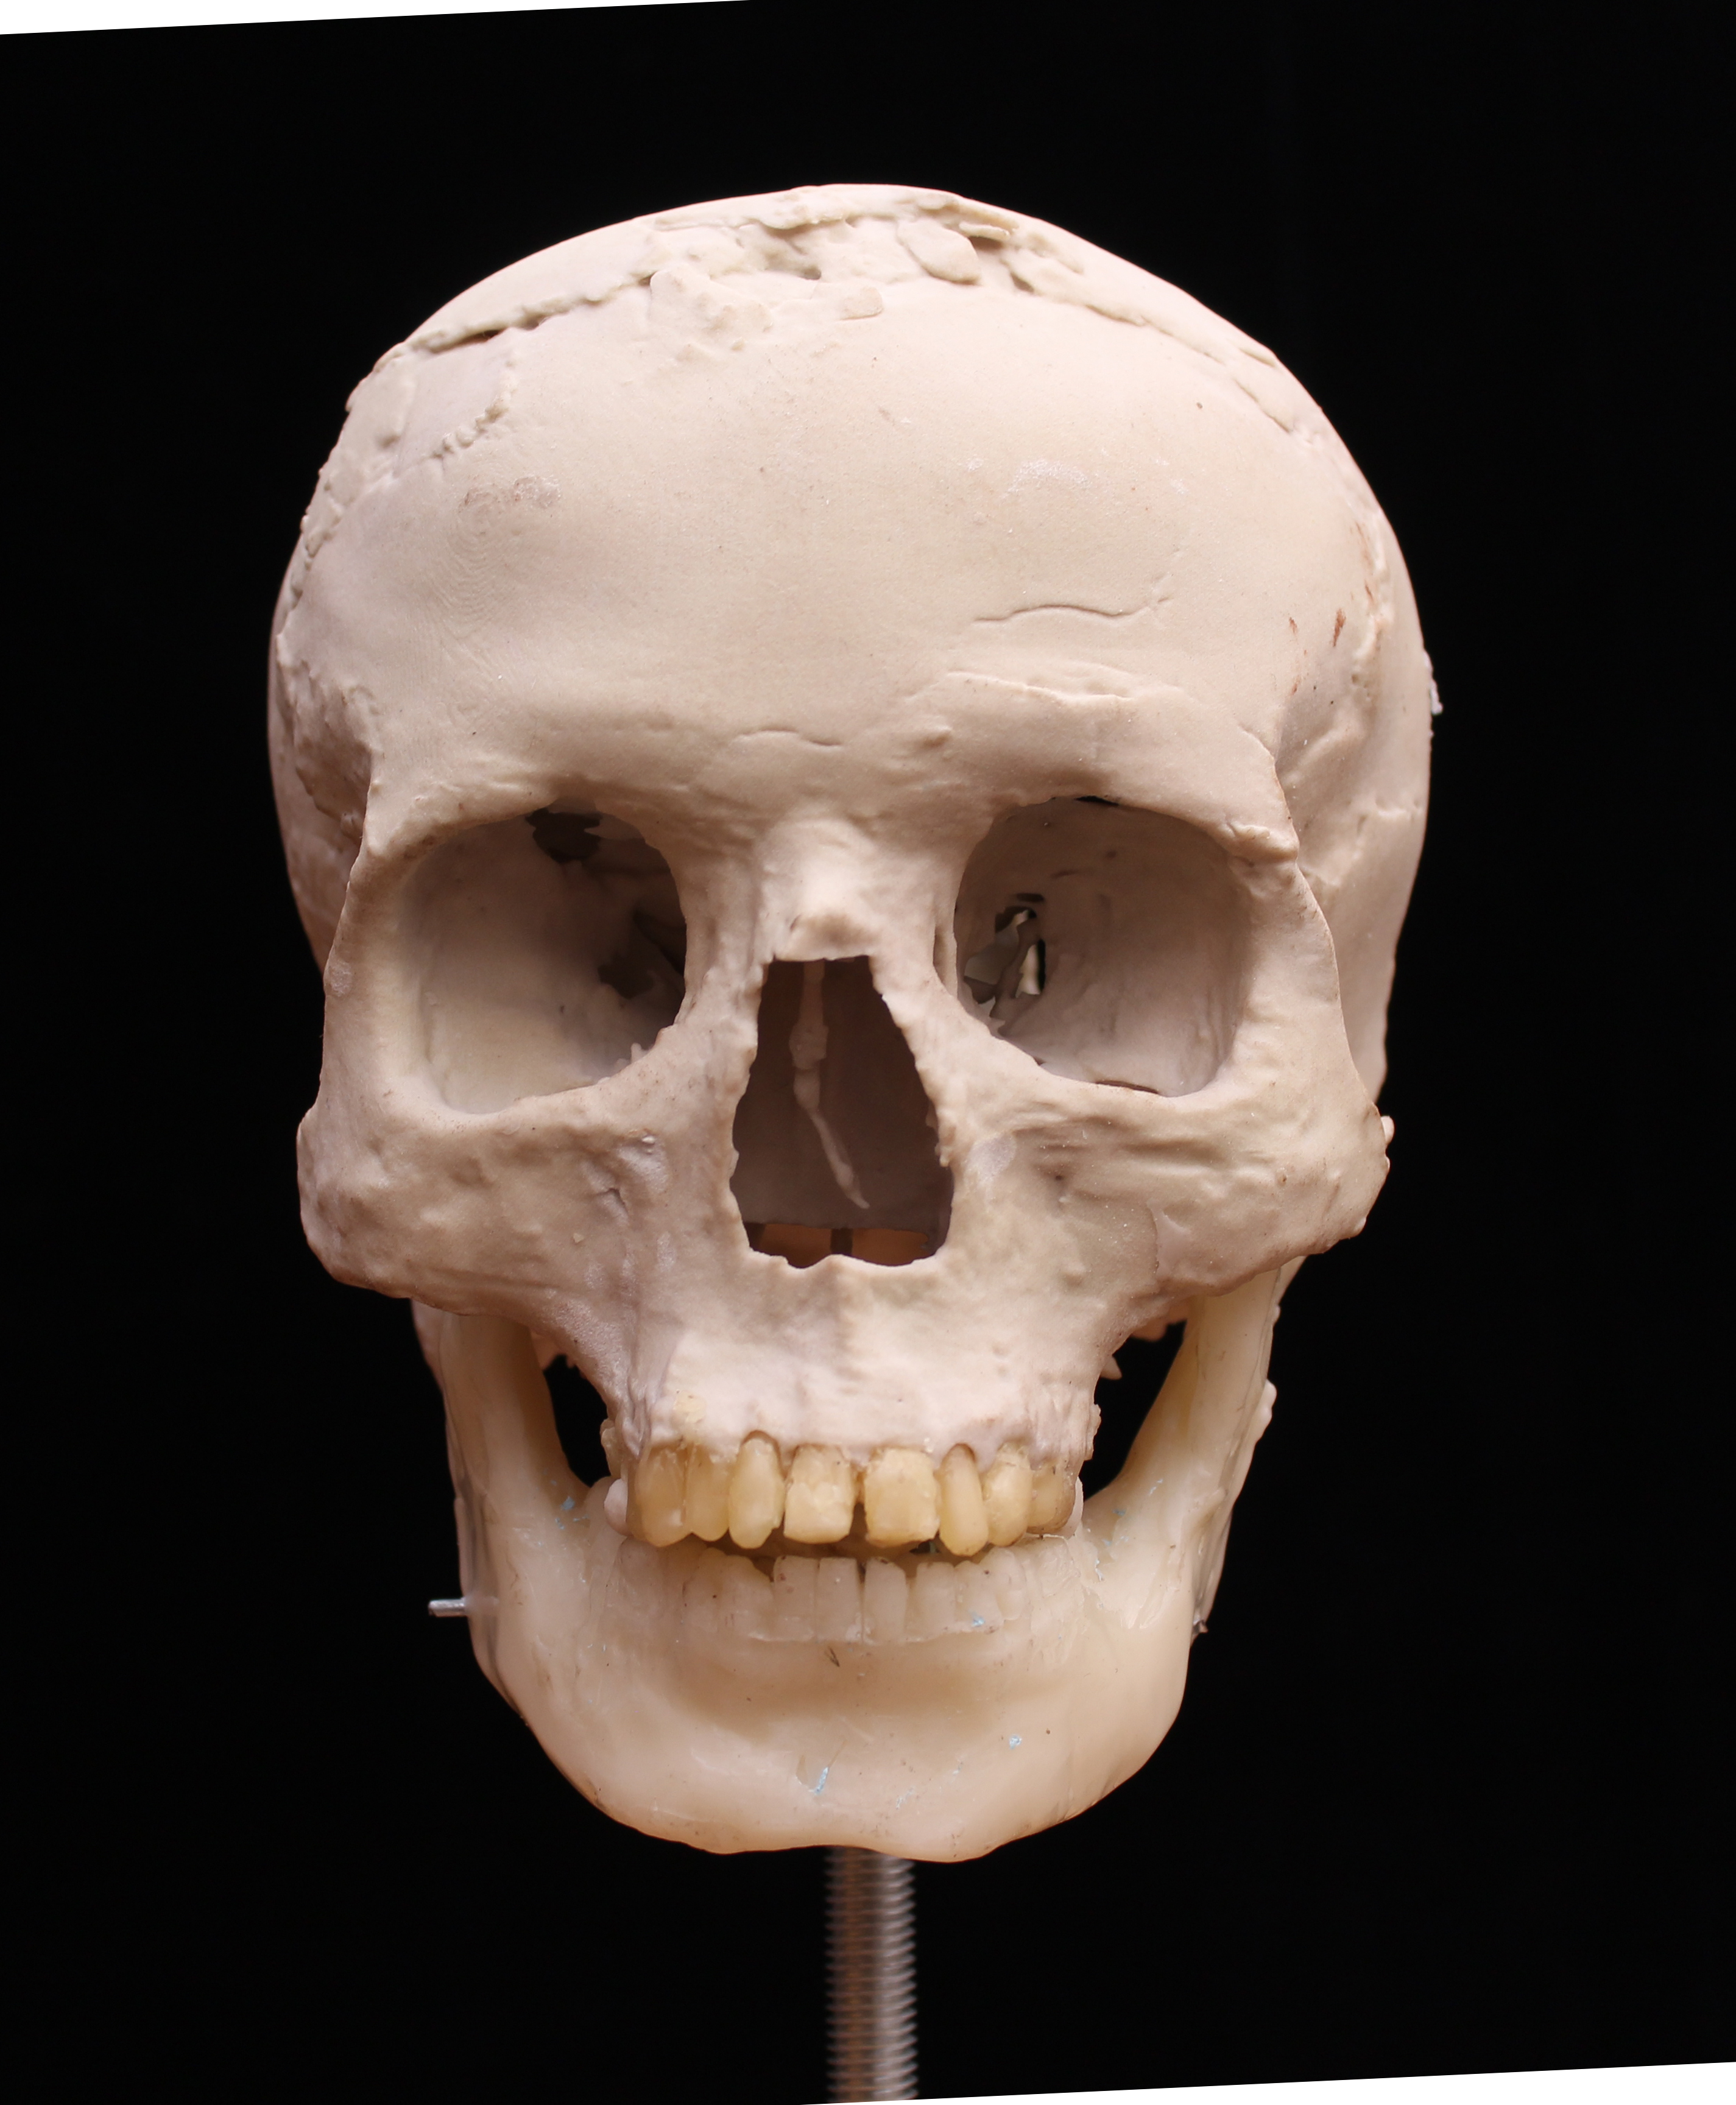 A 9,500-year-old skull gets a 3D makeover - CNN Style